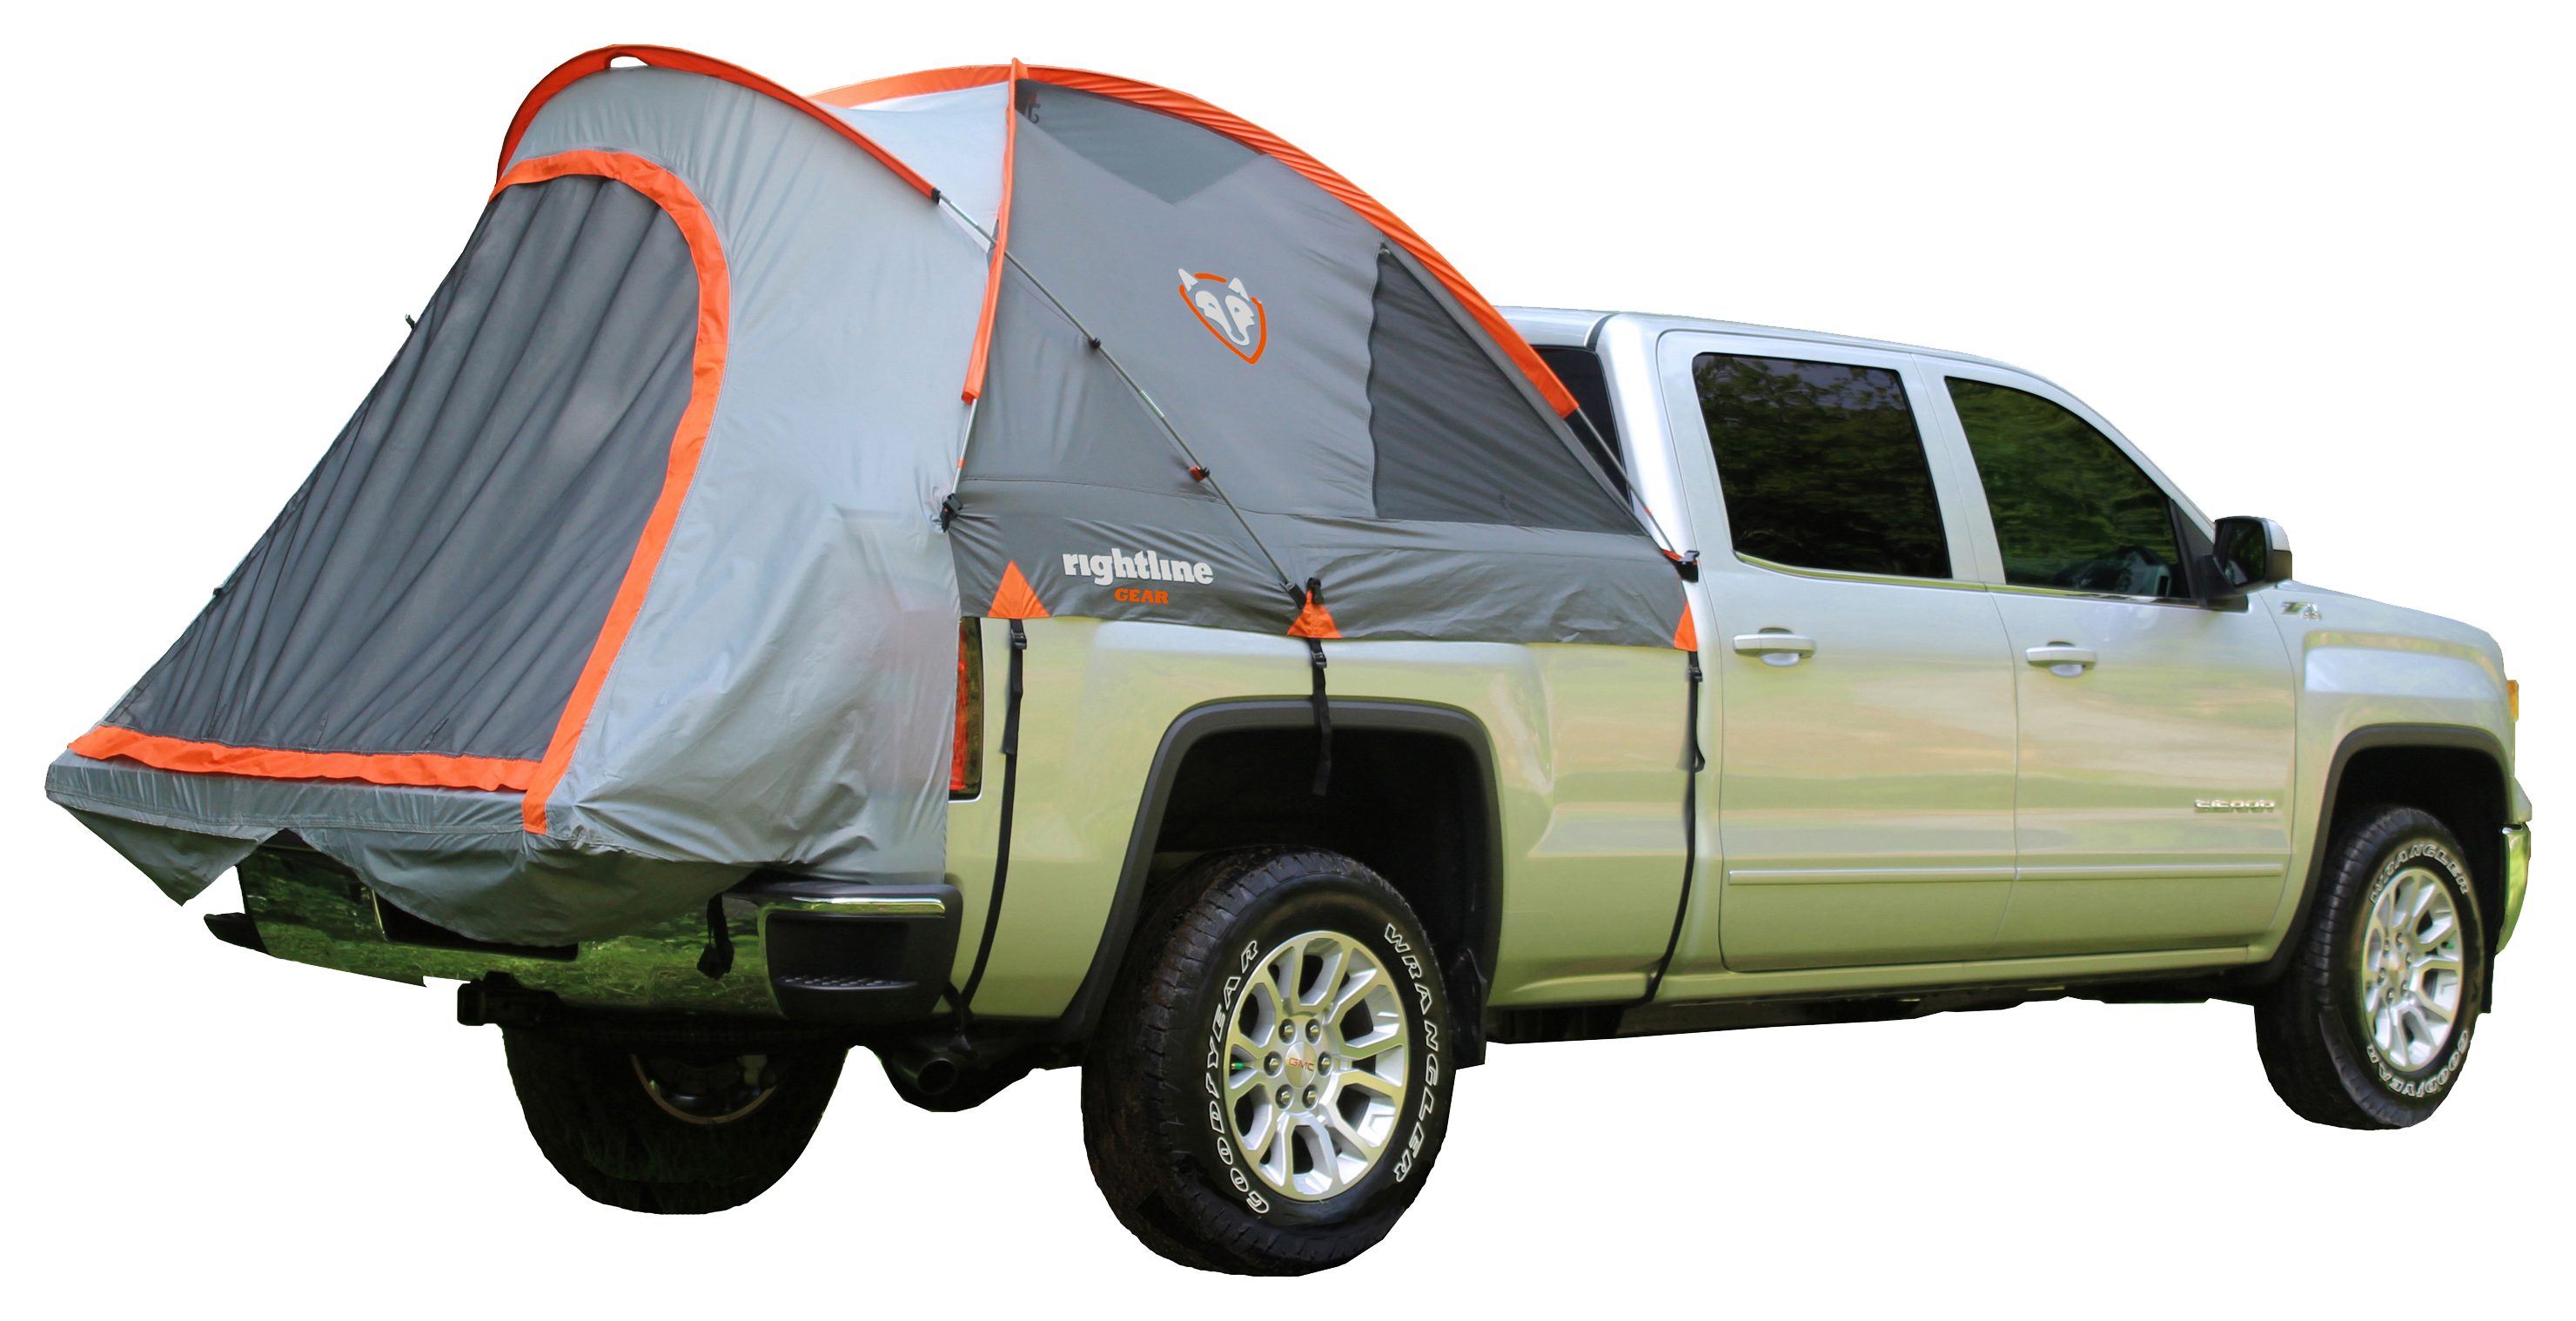 Rightline Gear 2-Person Truck Tent - 6' Compact Bed